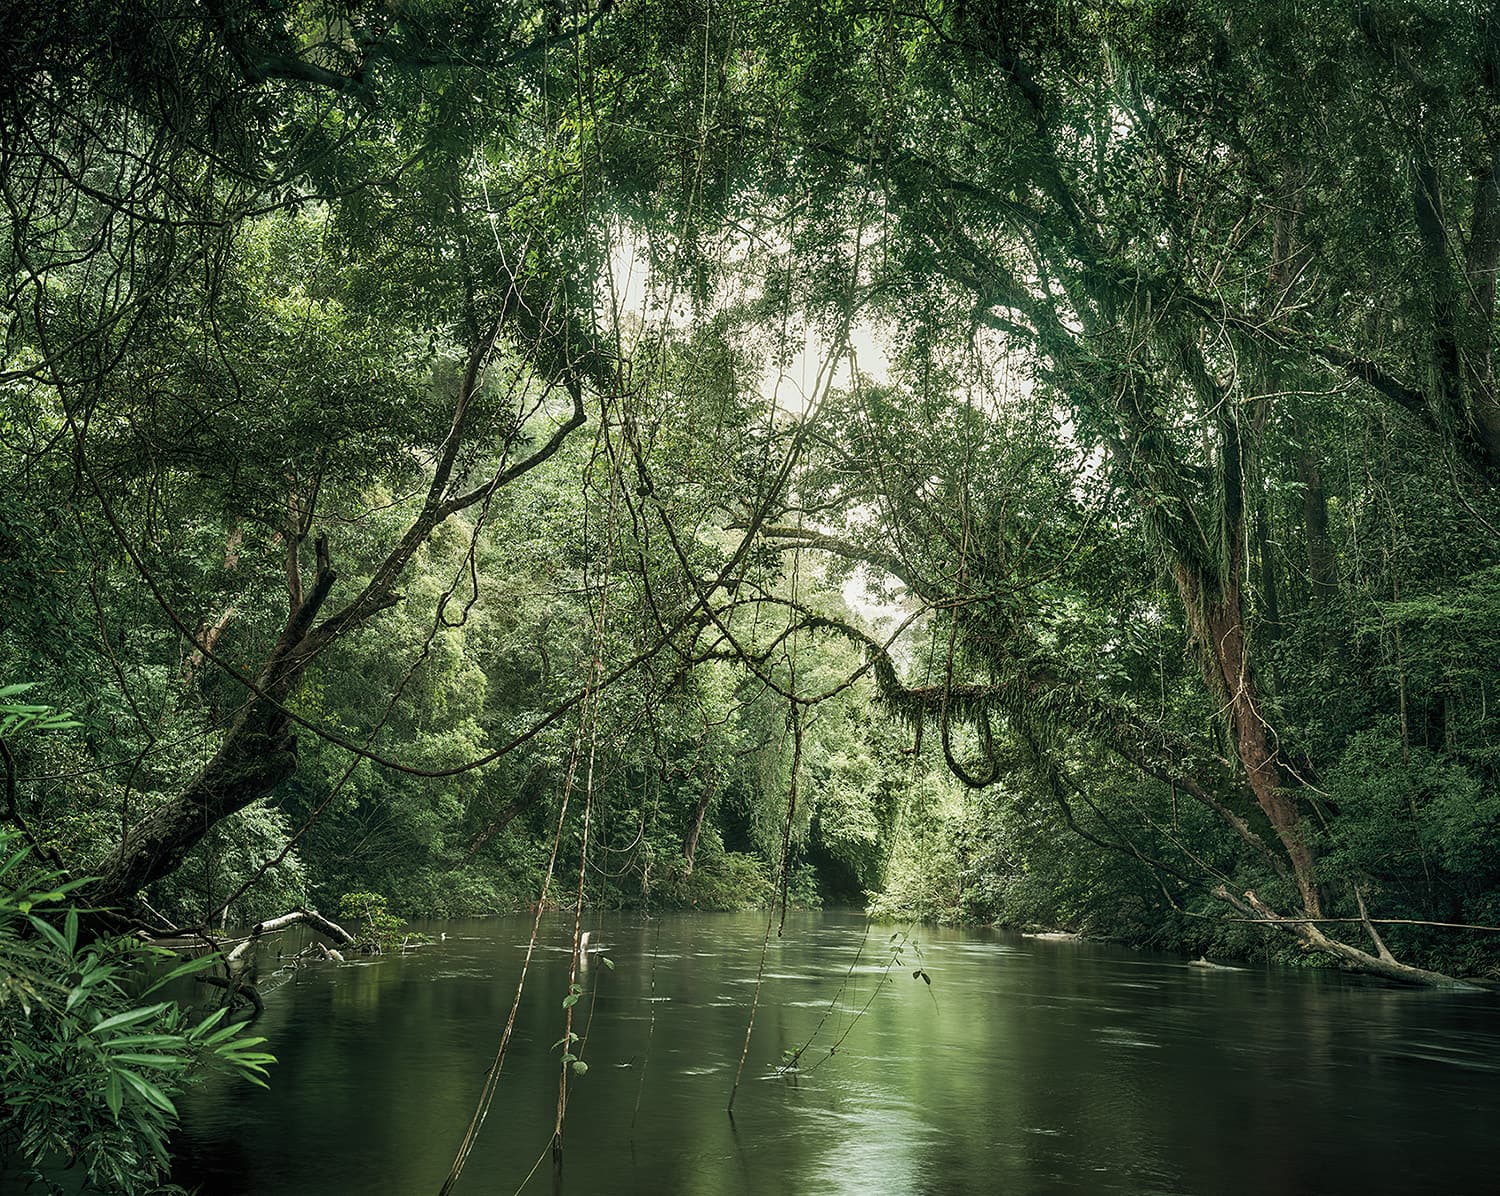 Primary Forest 1, Waterway, Malaysia, 11/2013 Olaf Otto Becker